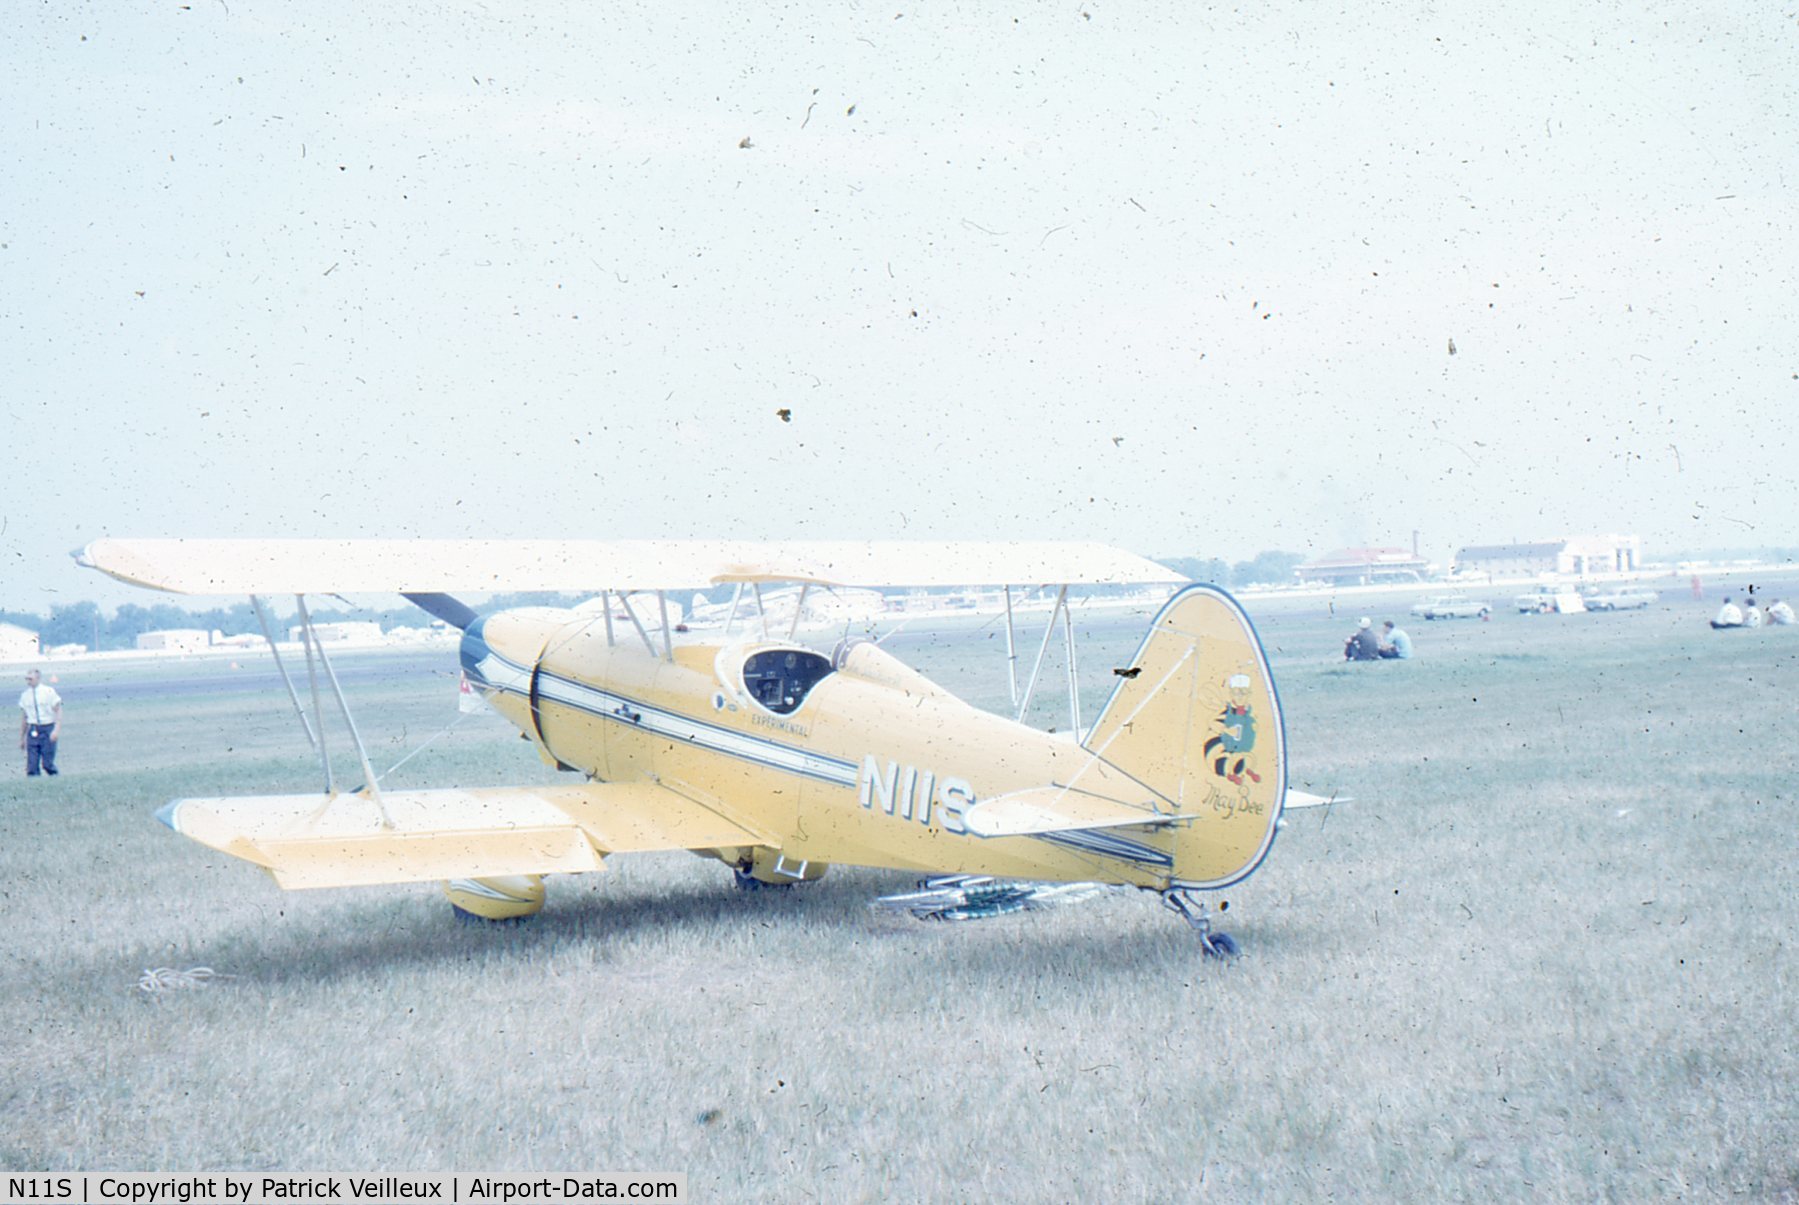 N11S, 1964 Southworth Eaa Bi-plane MAY BEE C/N JS-1, old picture of my grand father